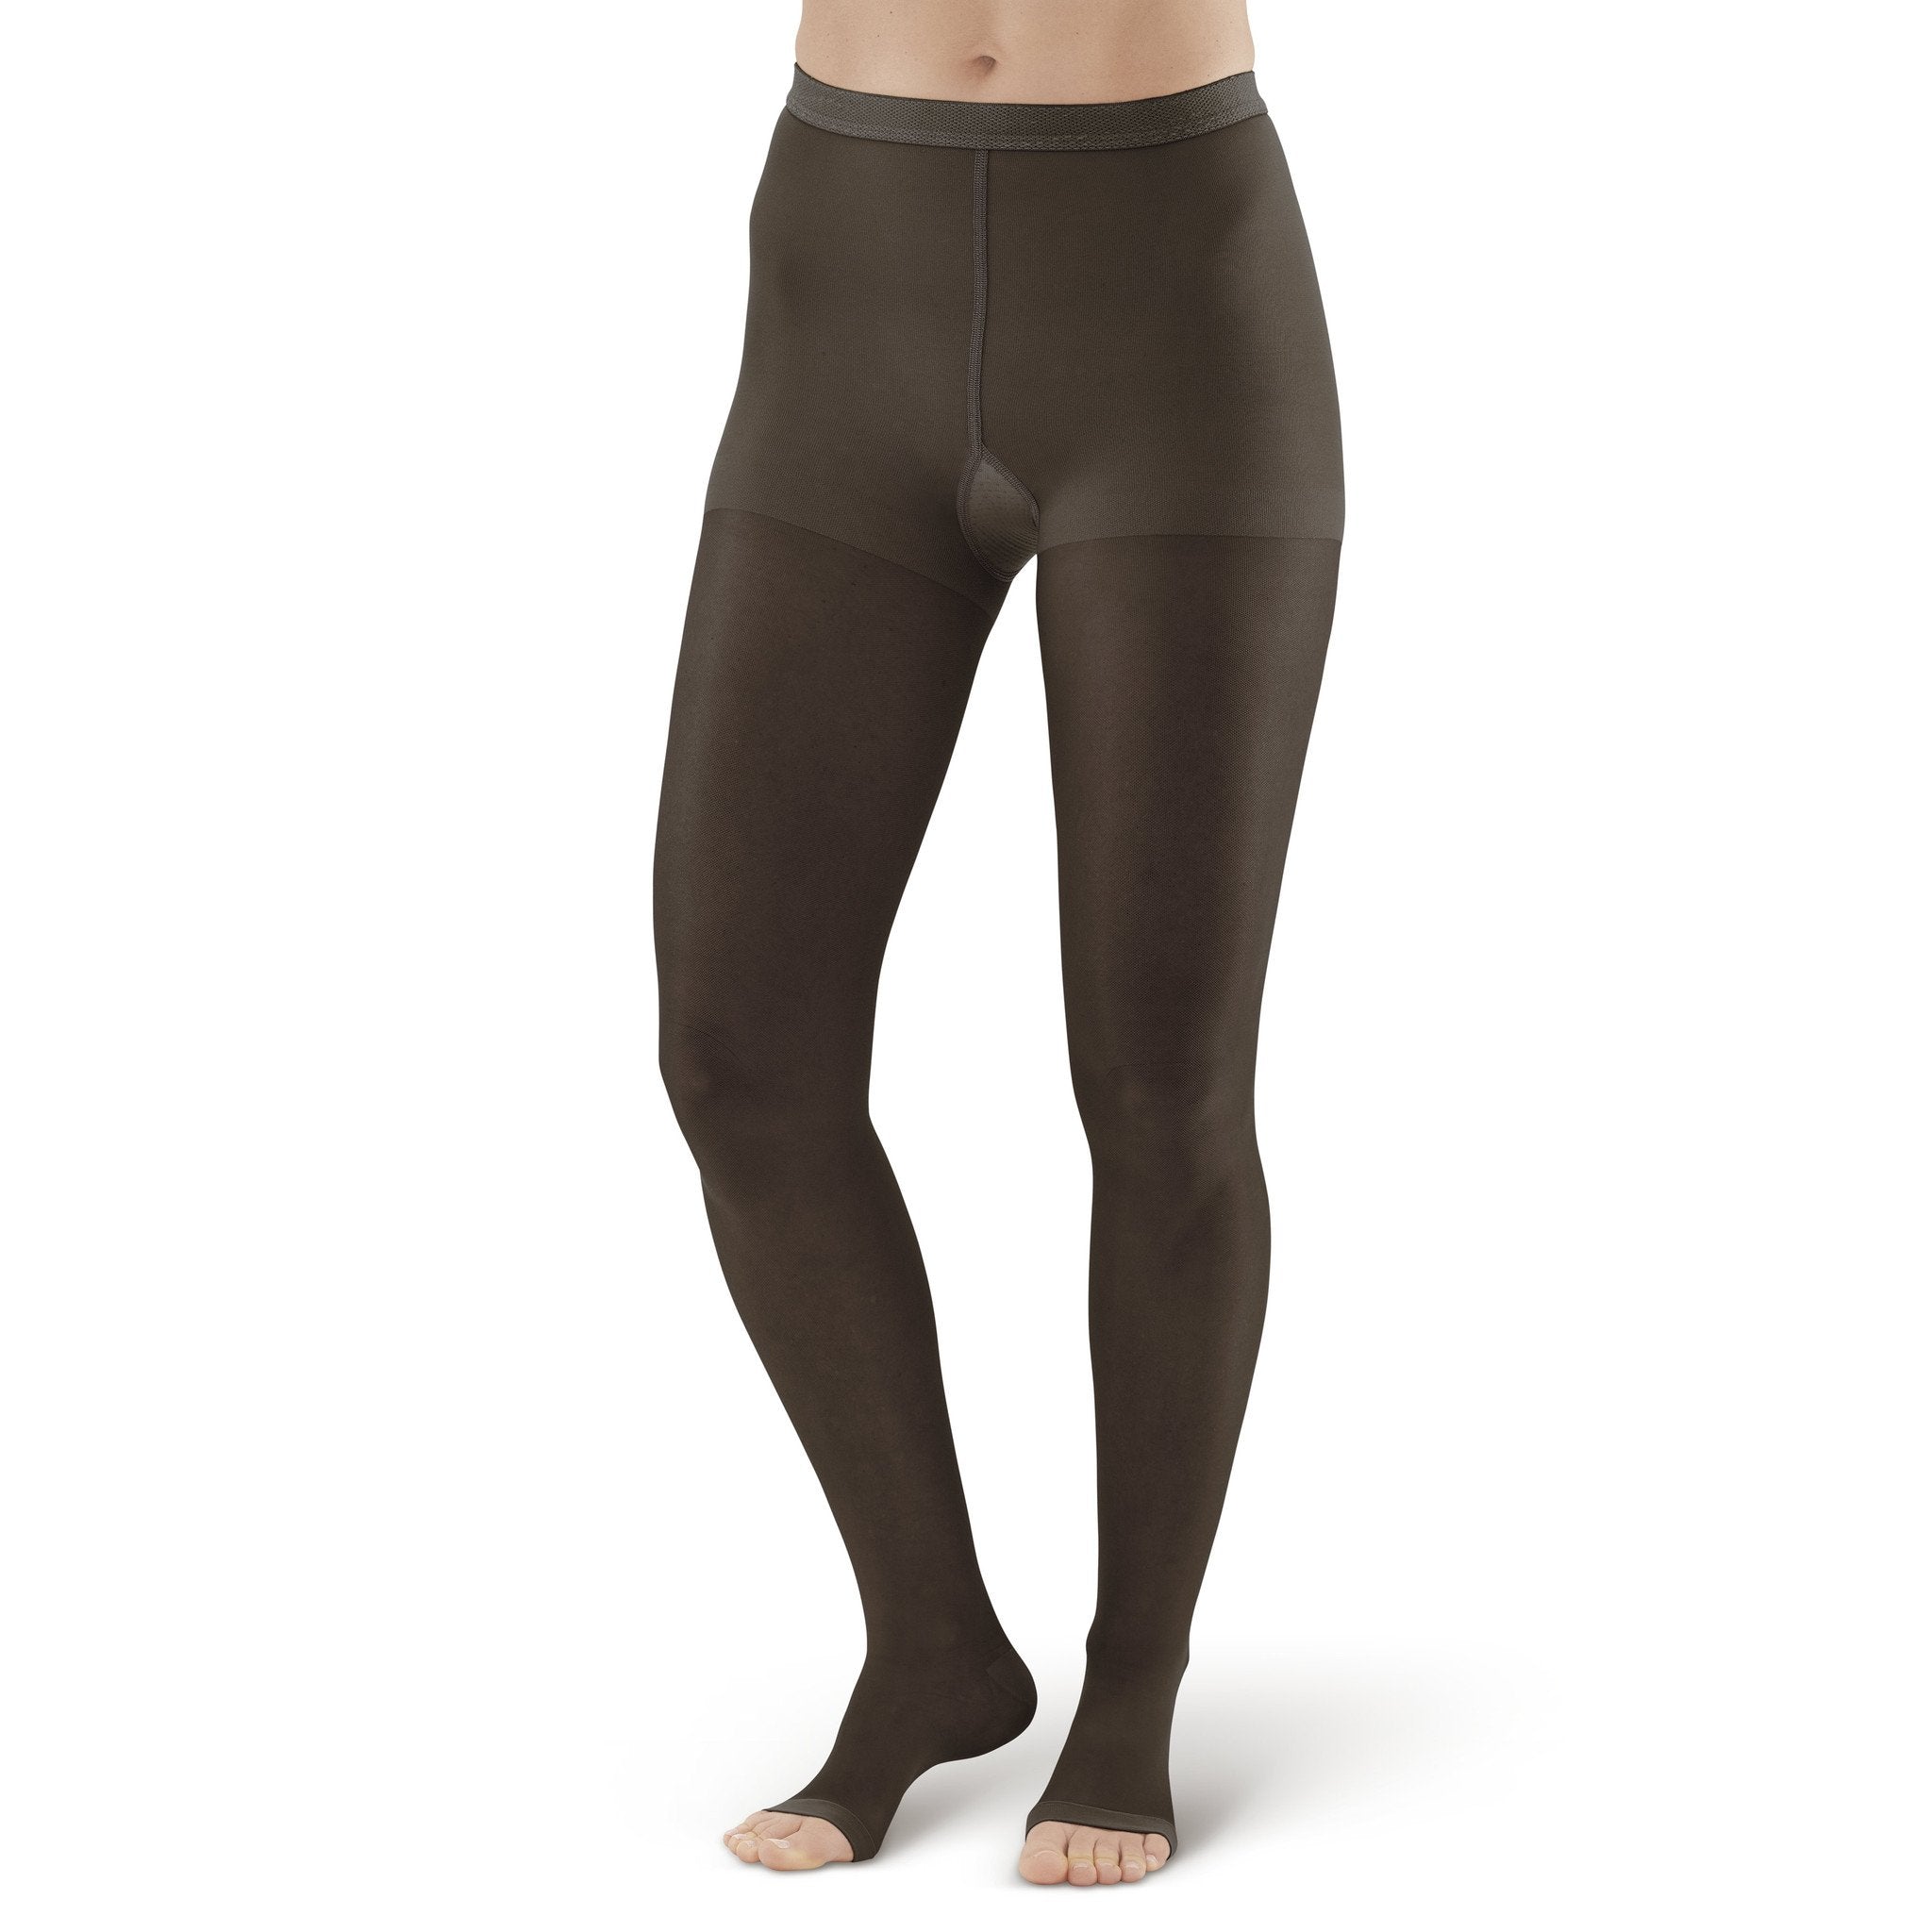 Made in USA - Womens Compression Tights 20-30mmHg for Travel - Beige,  X-Large